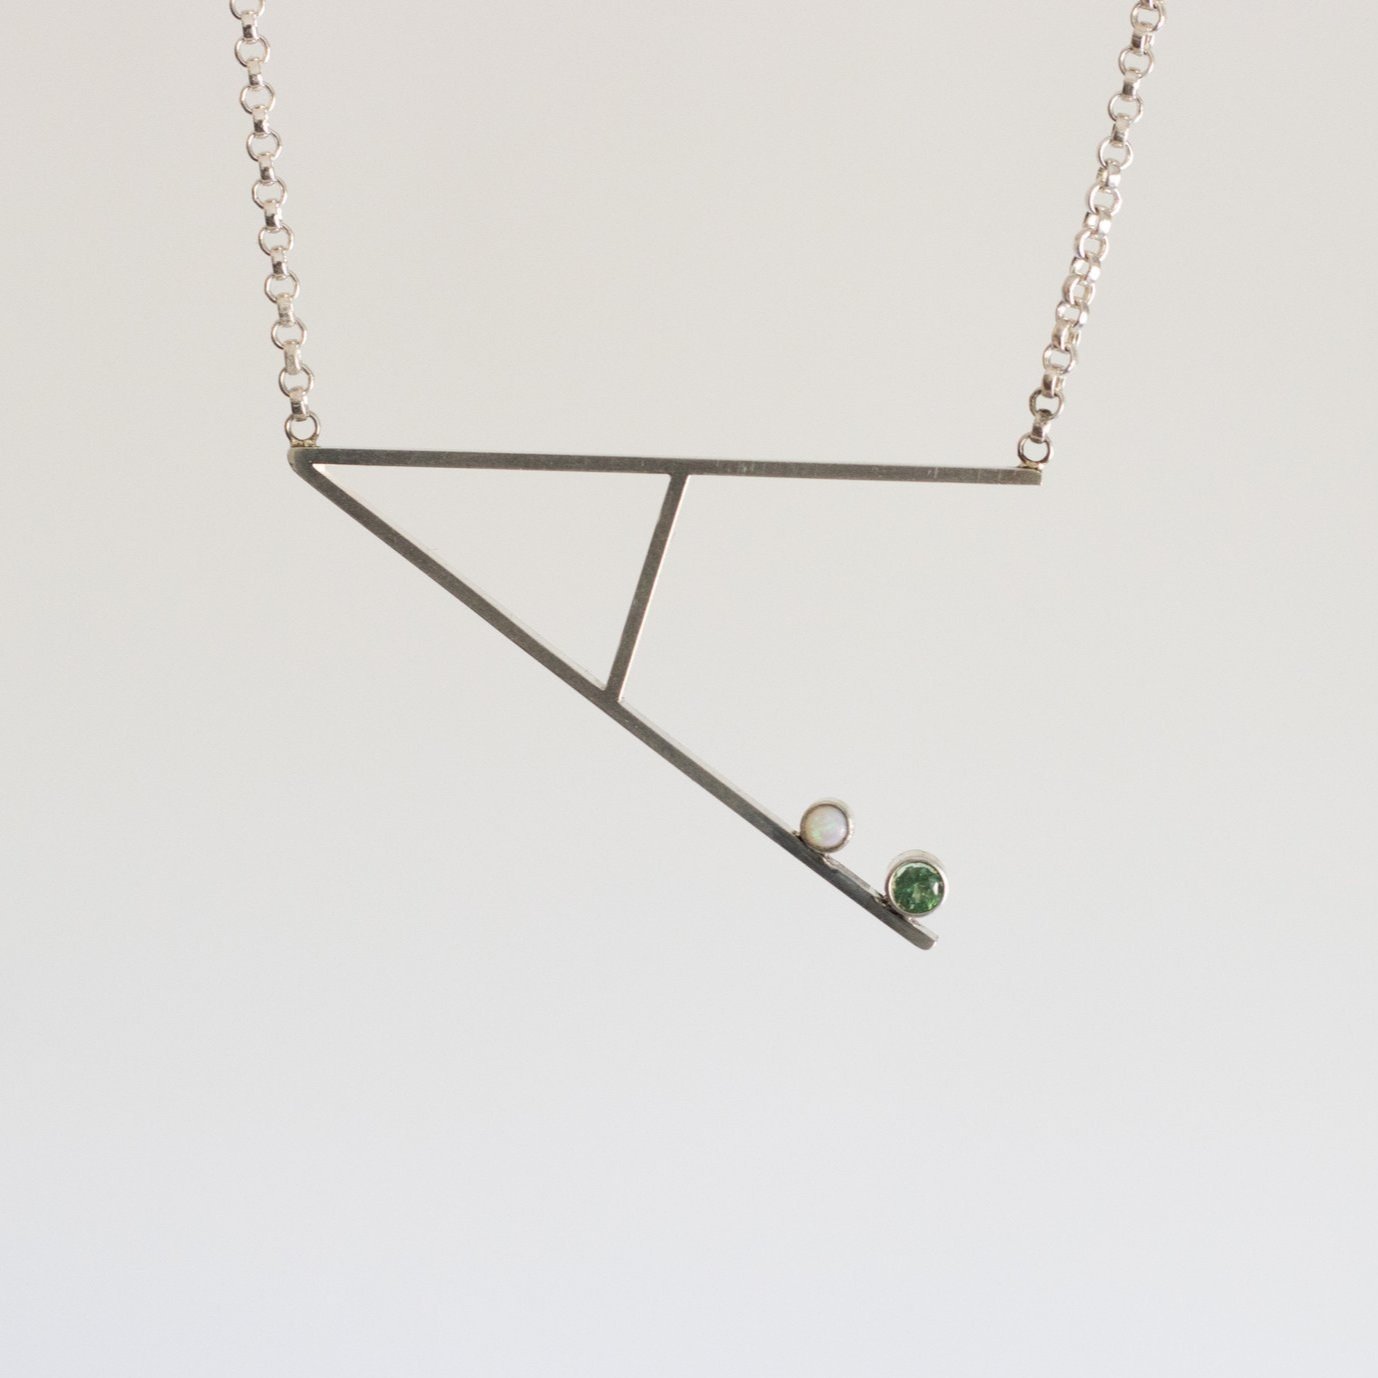 A Necklace with Emerald and Opal